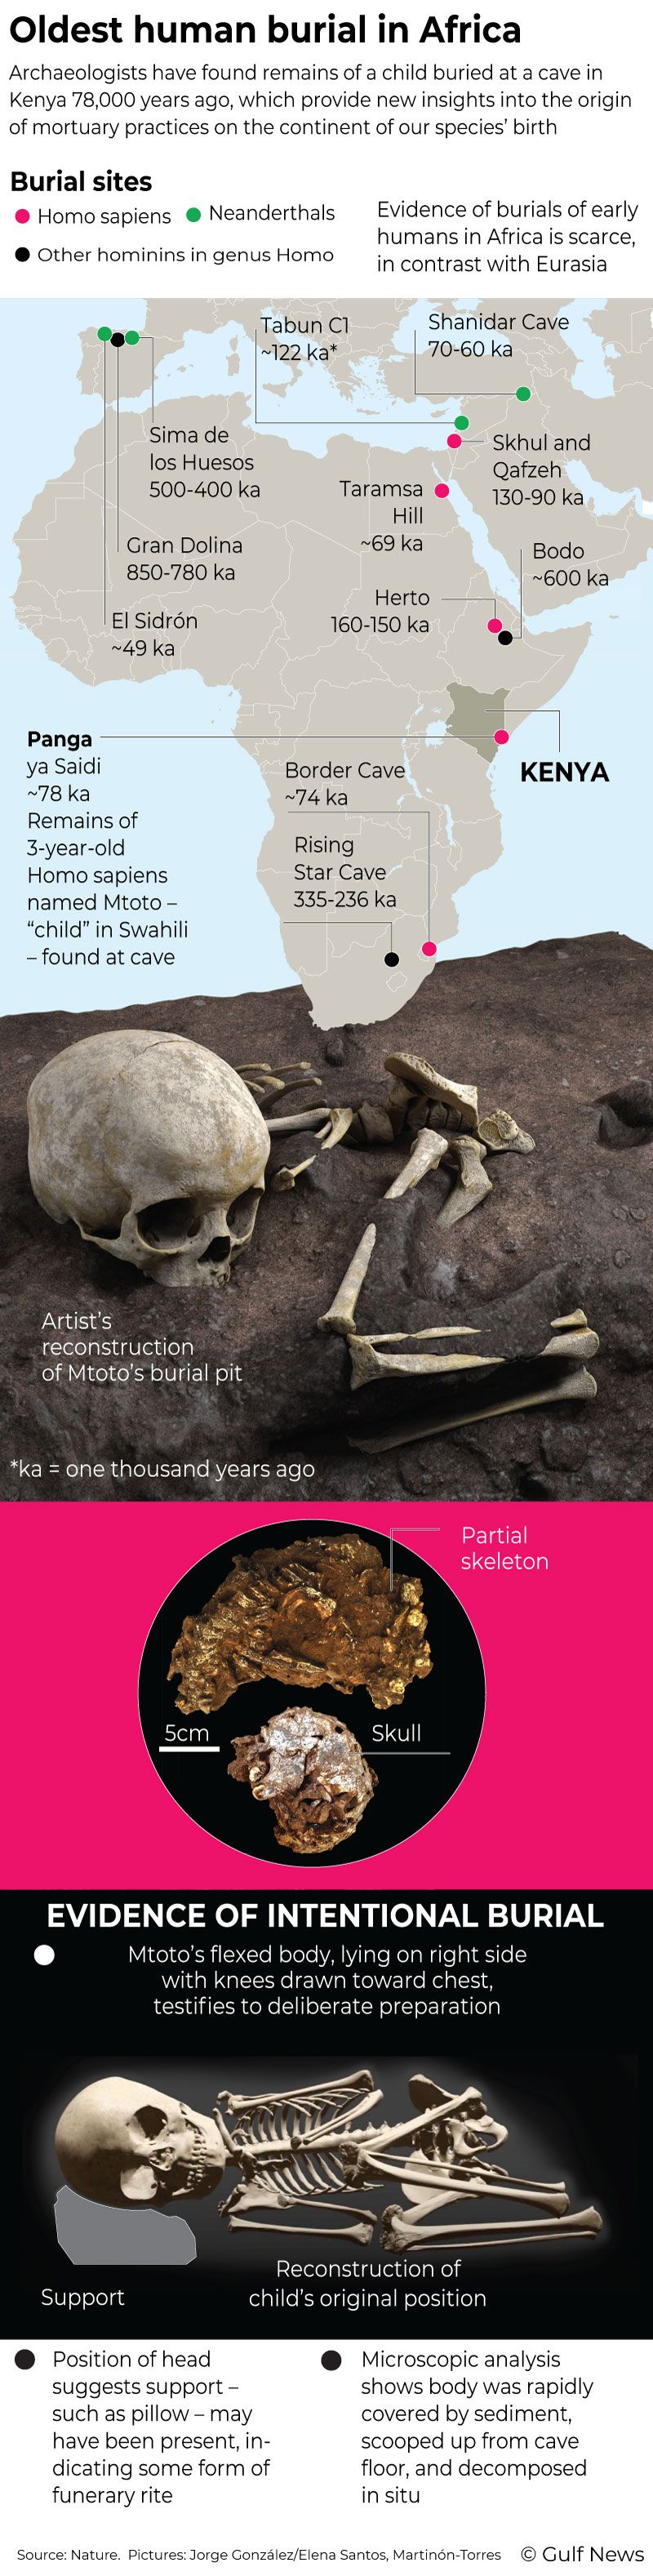 Earliest human burial in Africa discovered